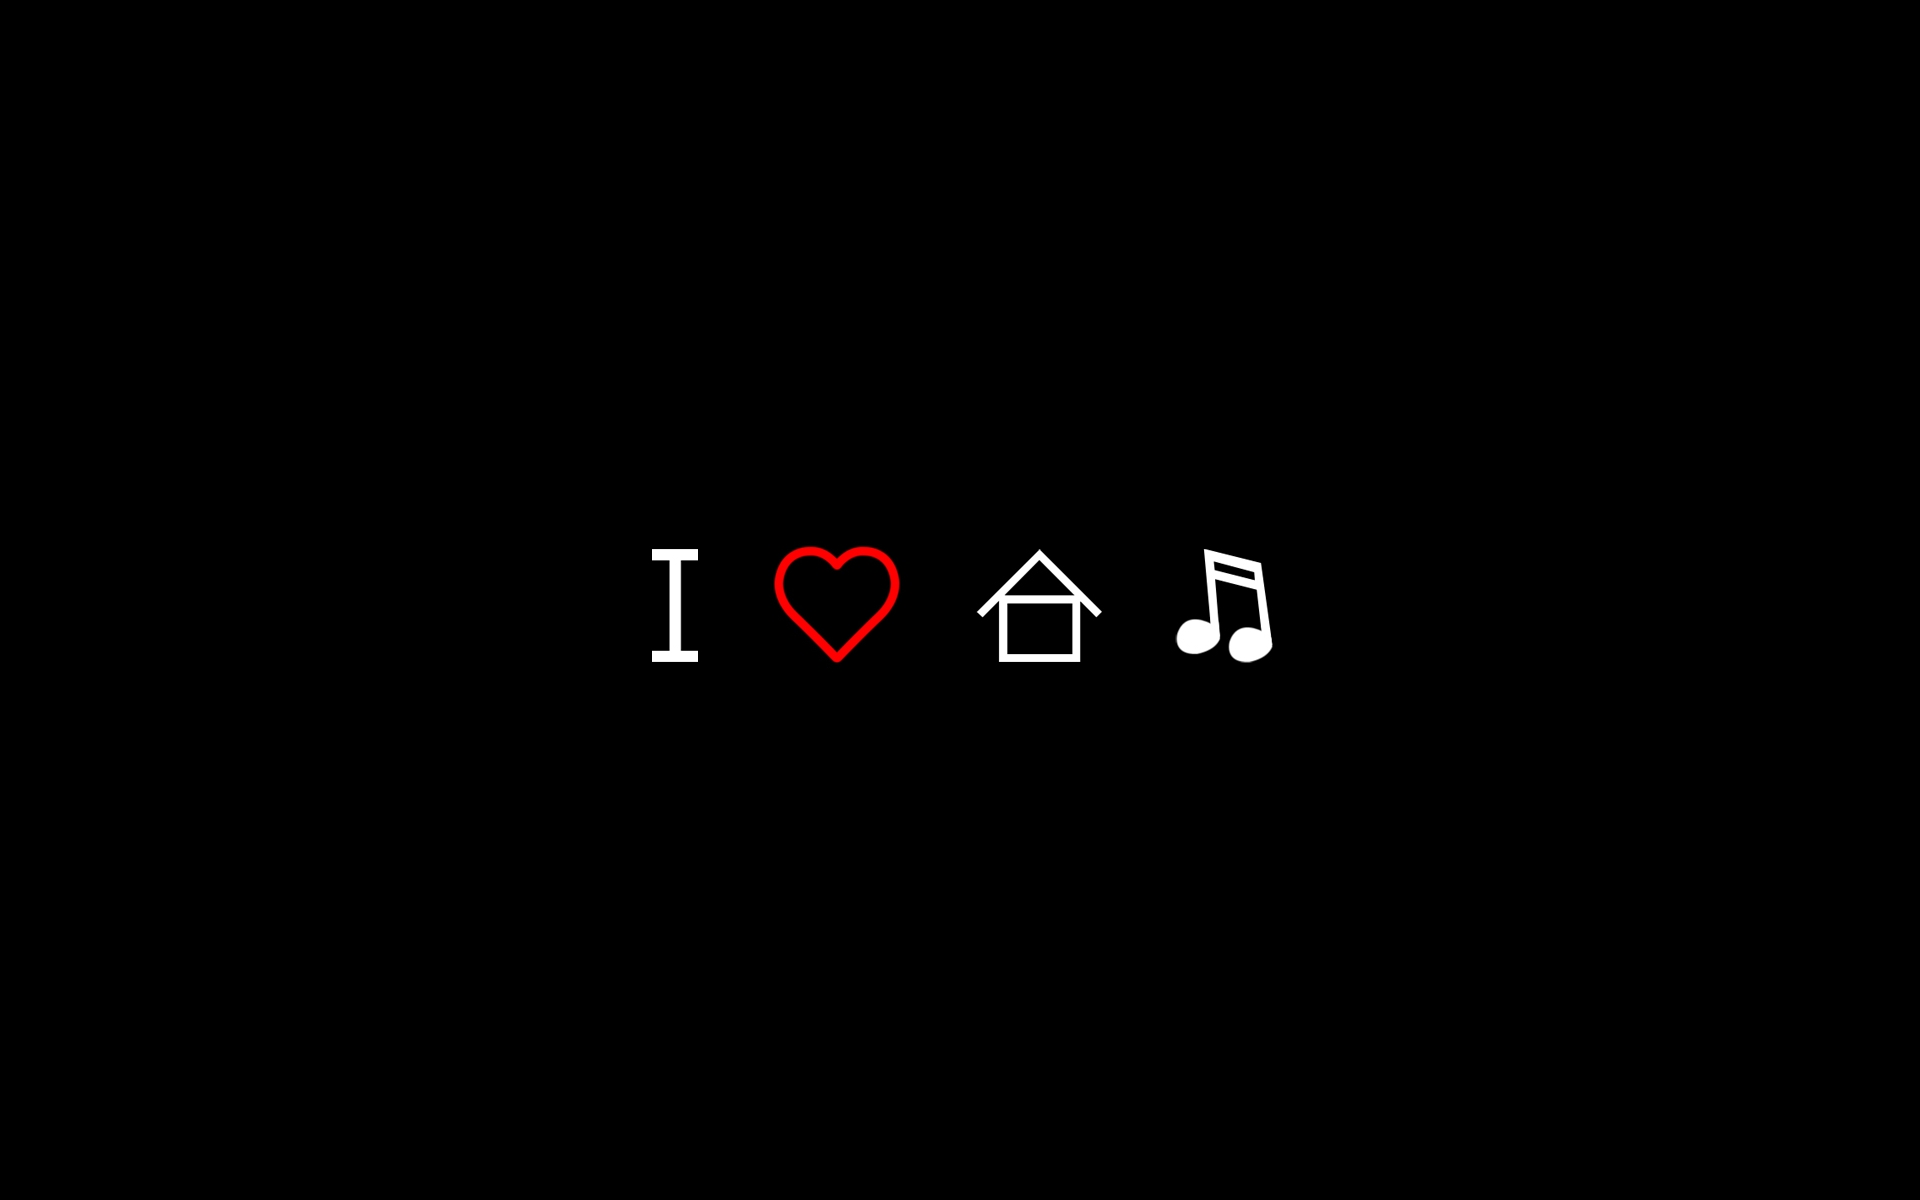 House Music Wallpaper Hd Images amp Pictures   Becuo